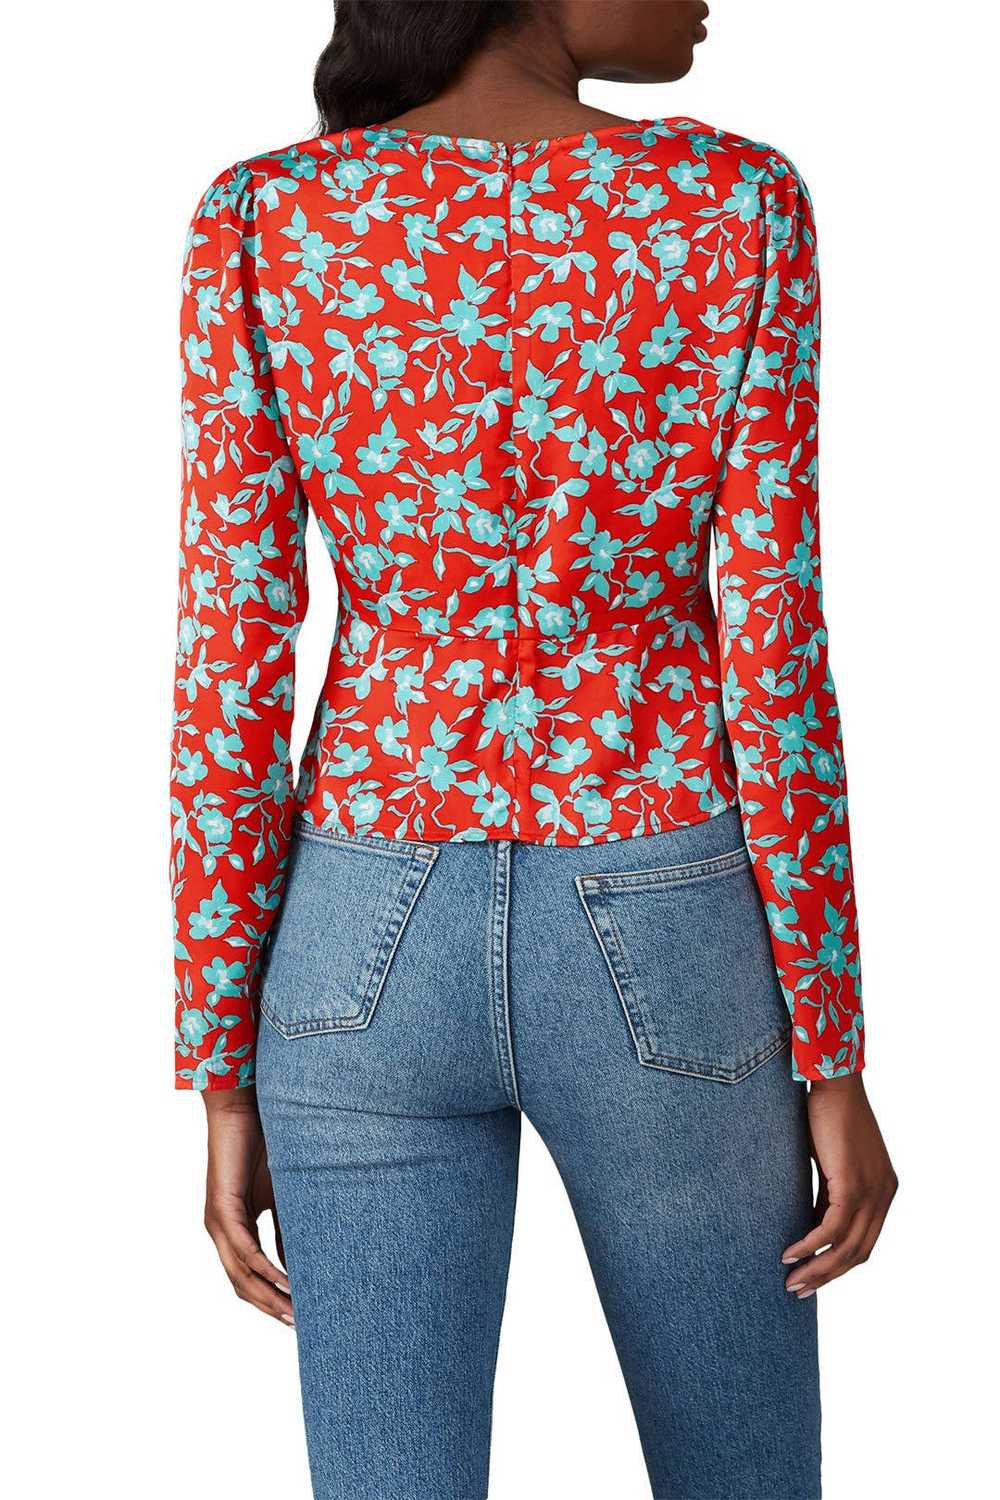 Love, Whit by Whitney Port Red Floral Crop Top - image 3